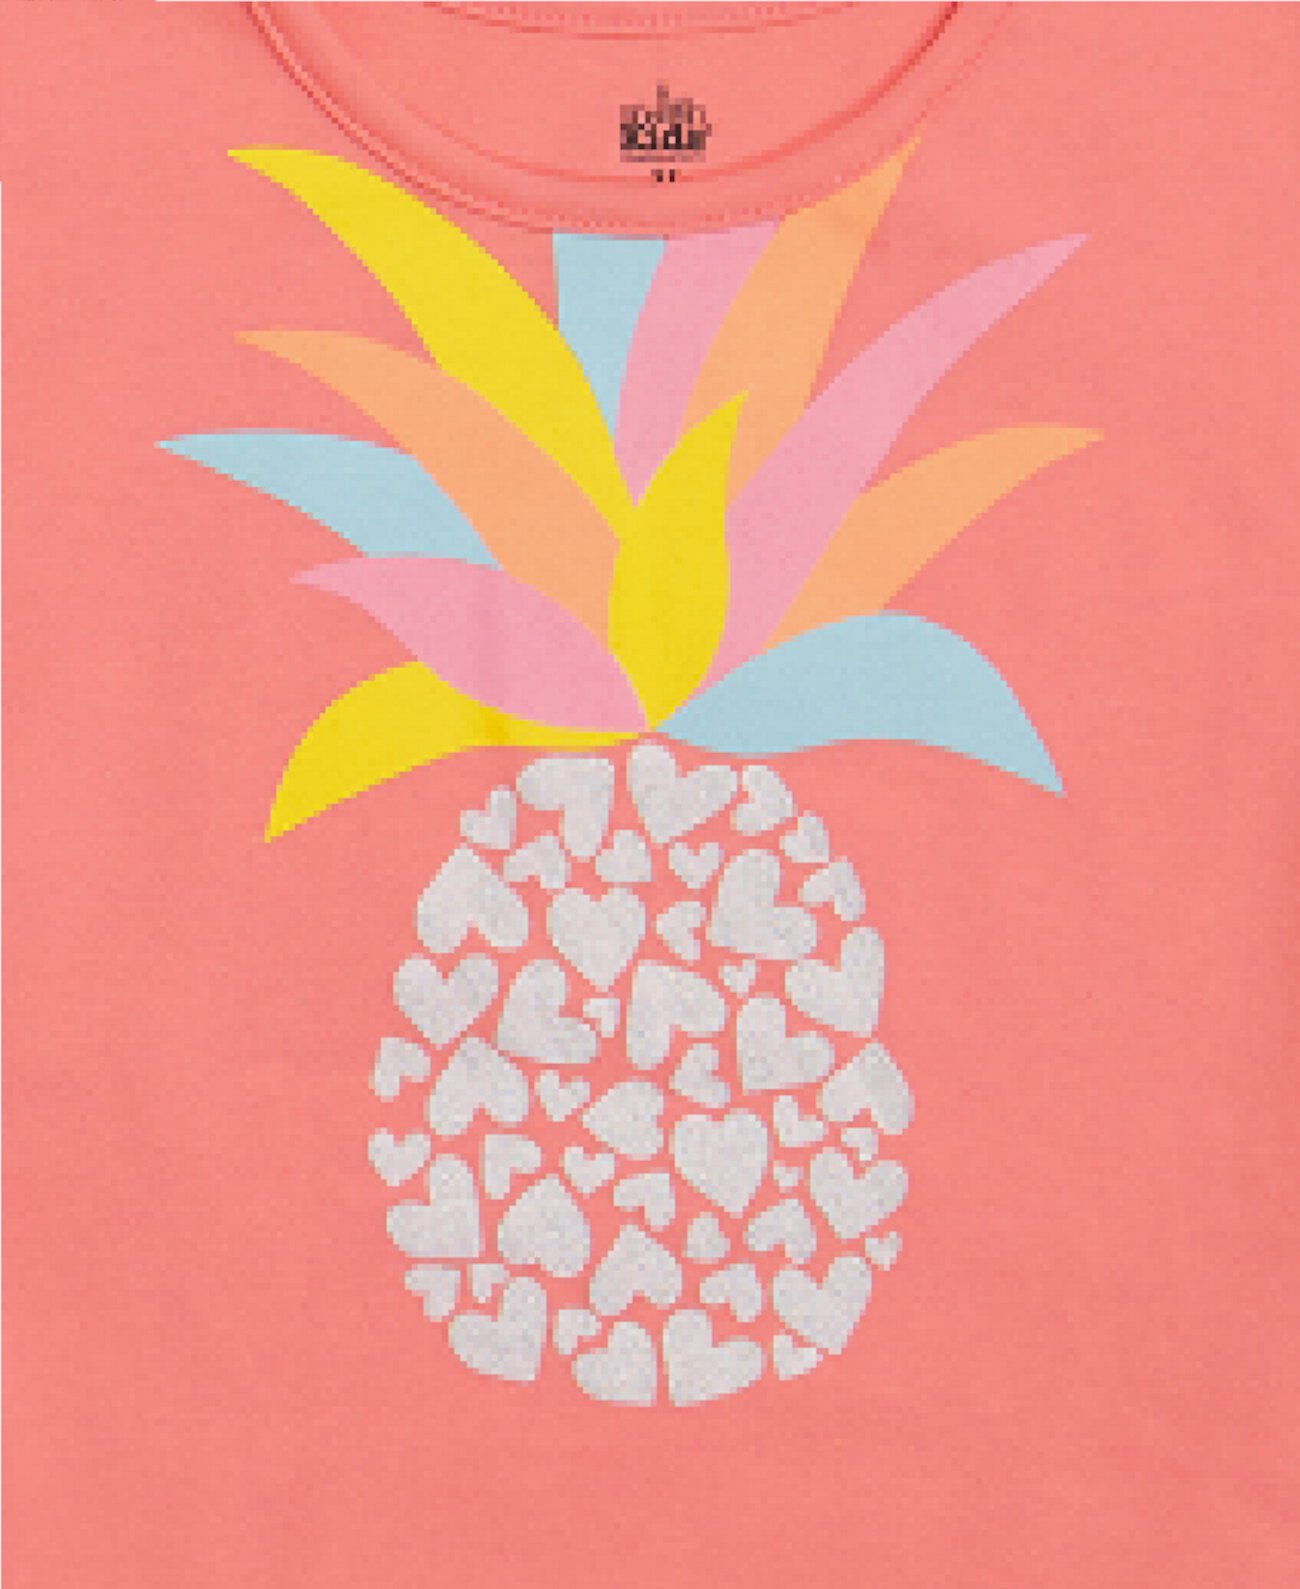 Little Girls Pineapple Tee and Printed French Terry Shorts, 2 piece set Kids Headquarters